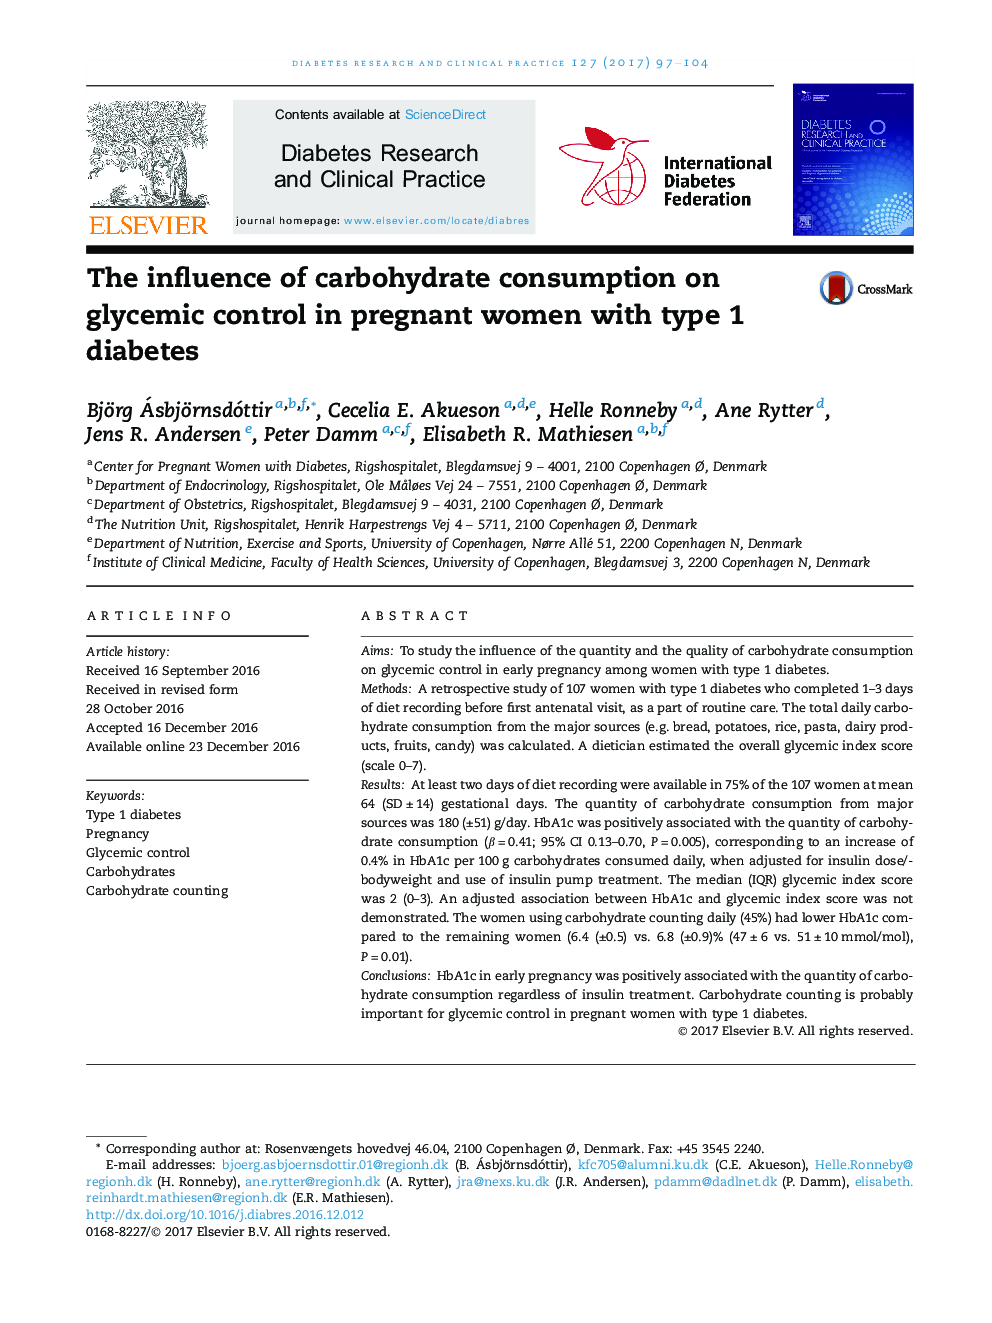 The influence of carbohydrate consumption on glycemic control in pregnant women with type 1 diabetes